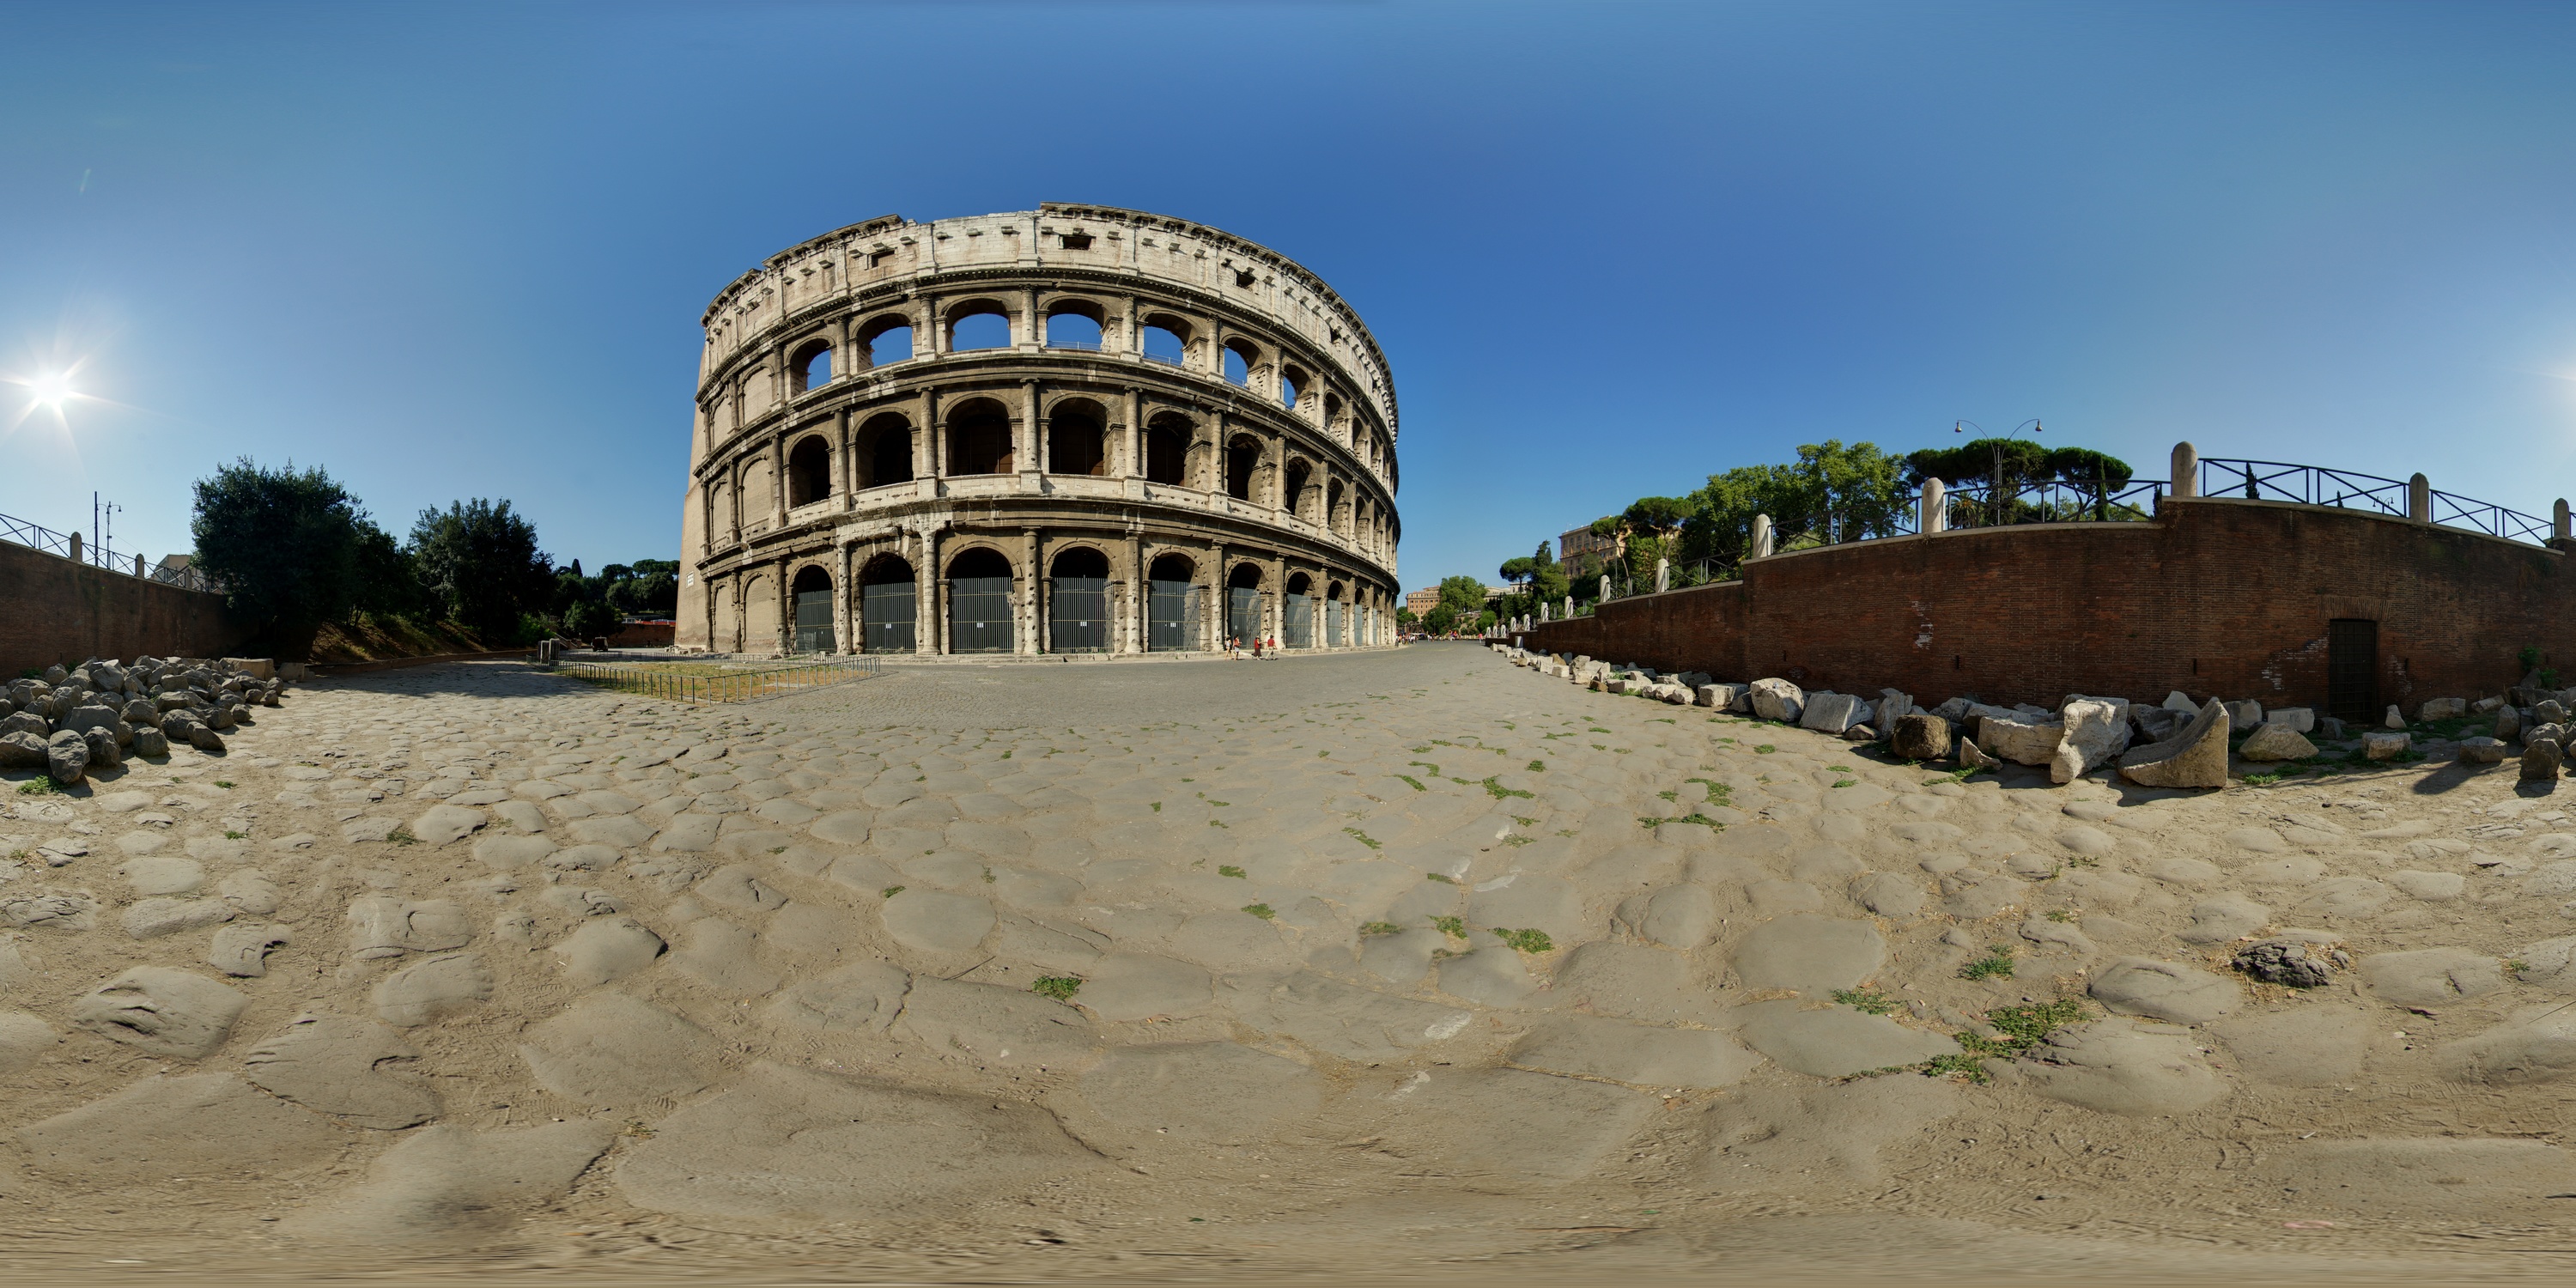 input_images/Colosseo.jpg